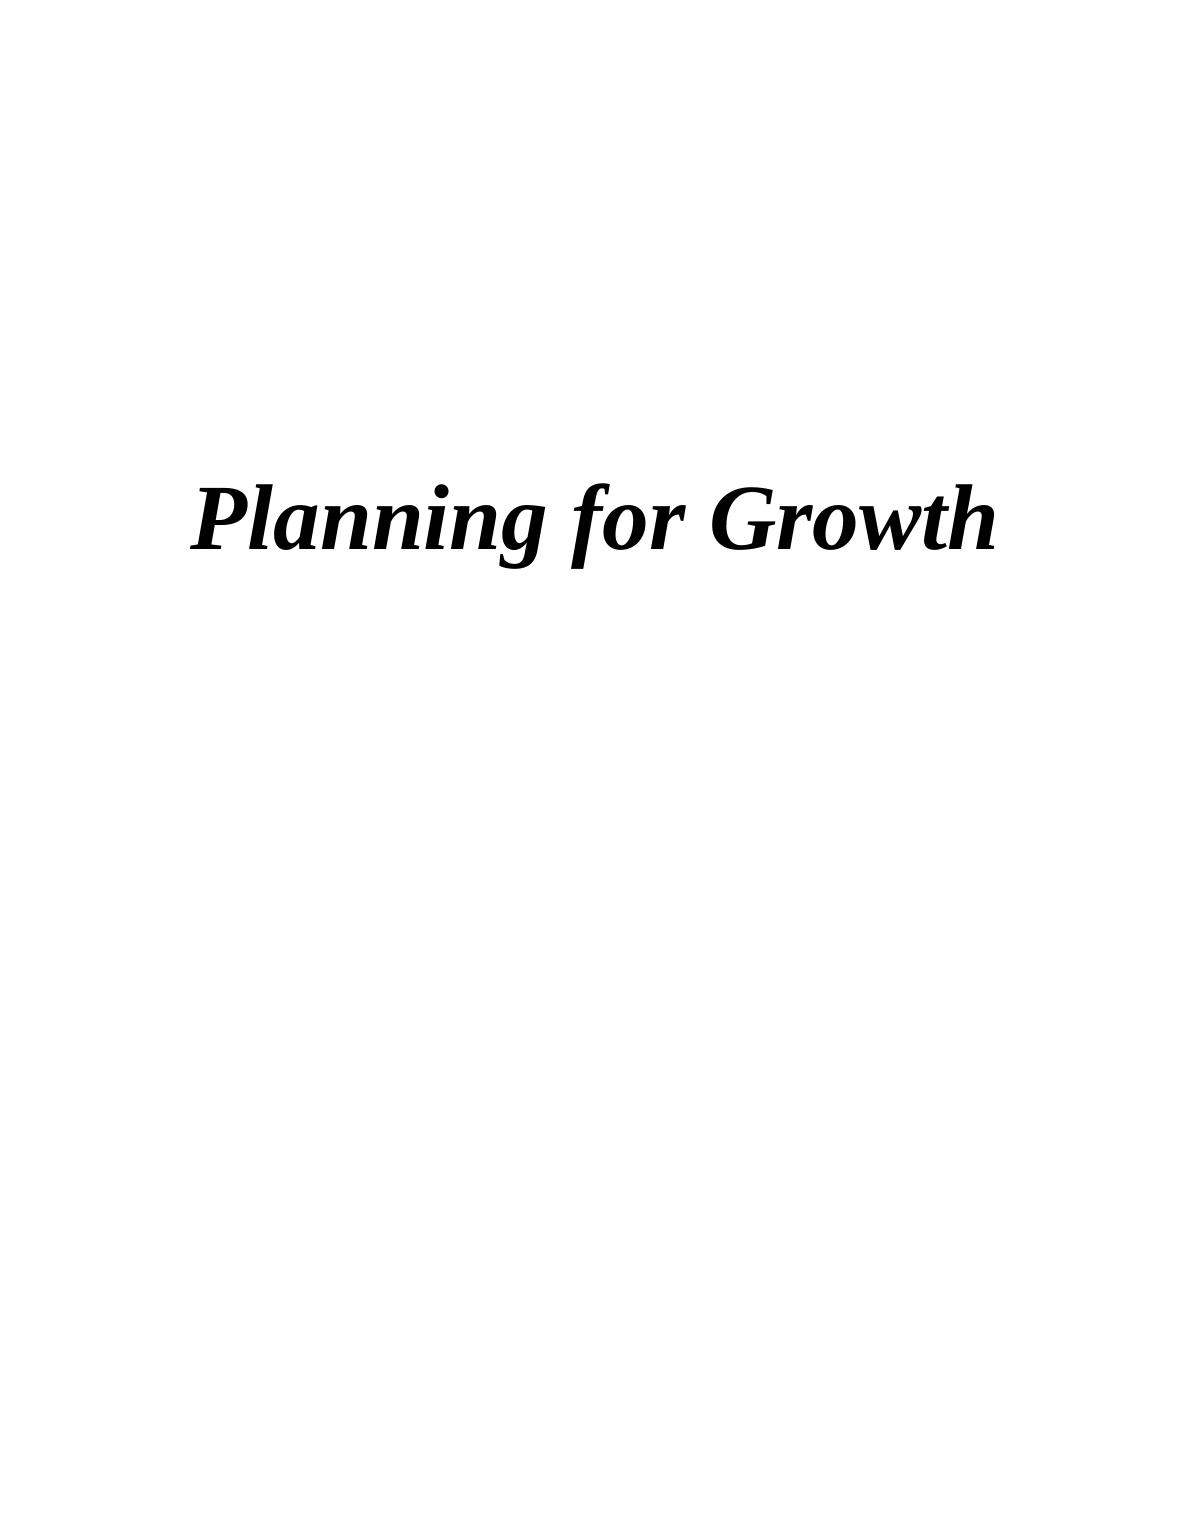 (Doc) Planning for Growth Solution Assignment_1